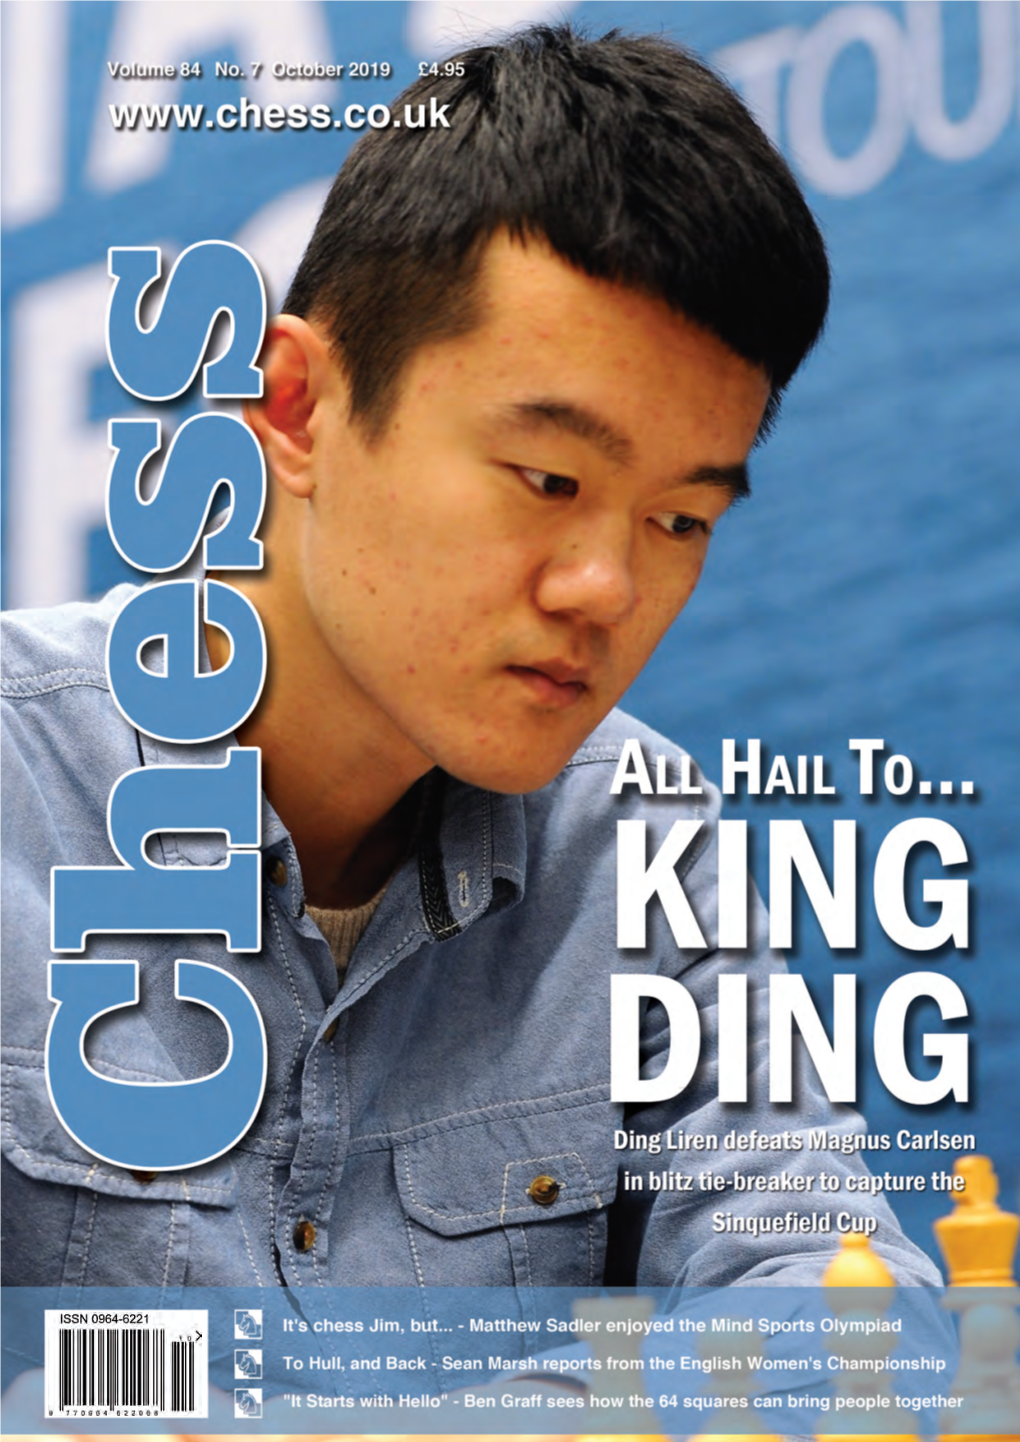 Chess Mag - 21 6 10 22/09/2019 13:57 Page 3